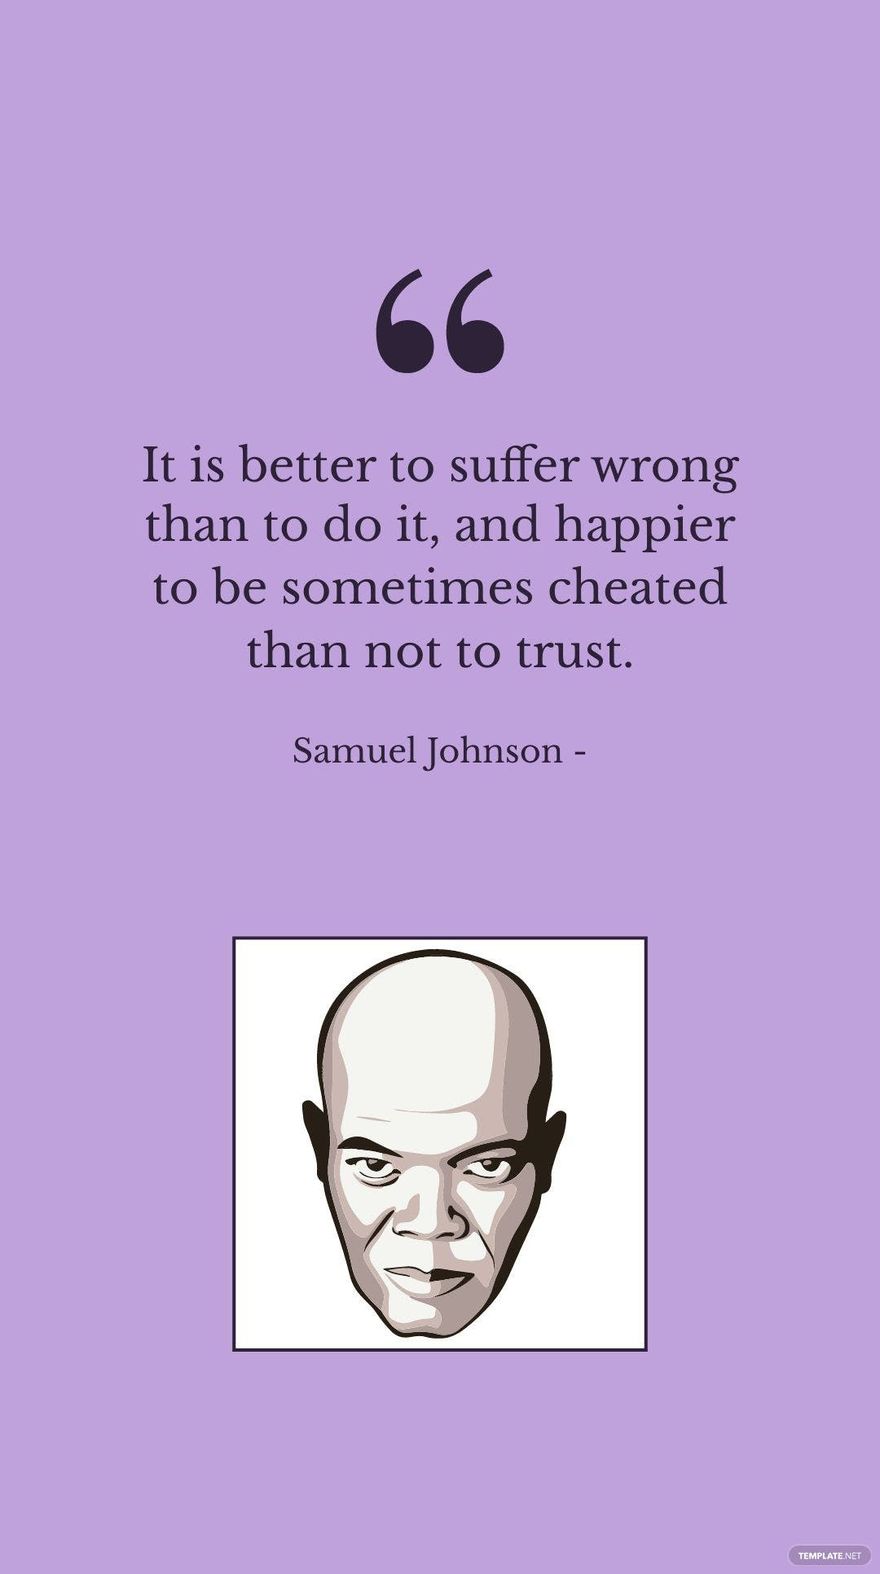 Samuel Johnson - It is better to suffer wrong than to do it, and happier to be sometimes cheated than not to trust.